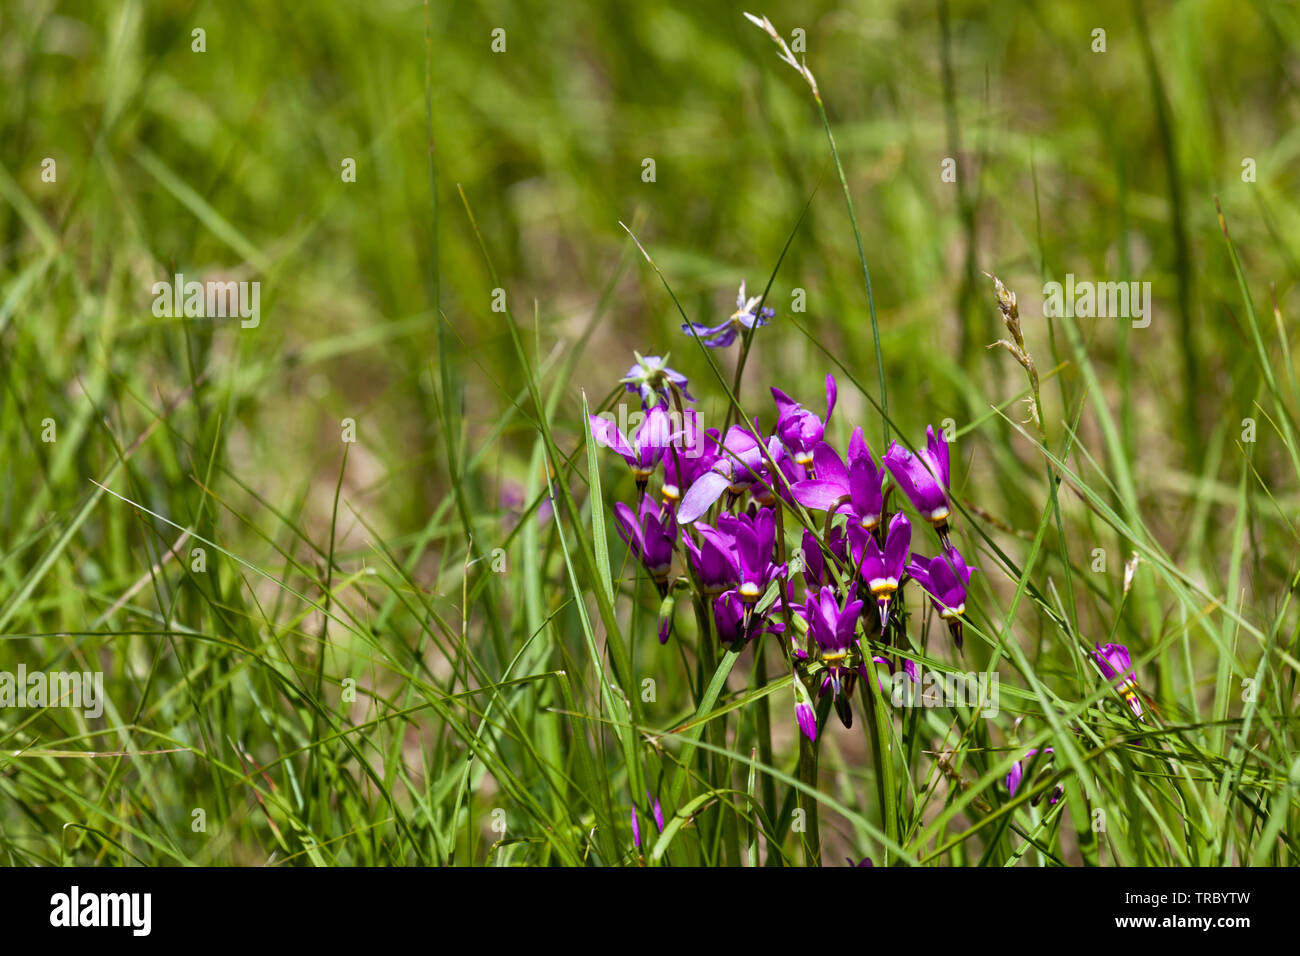 A group of springtime purple shooting star wildflowers growing in tall grass with a blurred background. Stock Photo